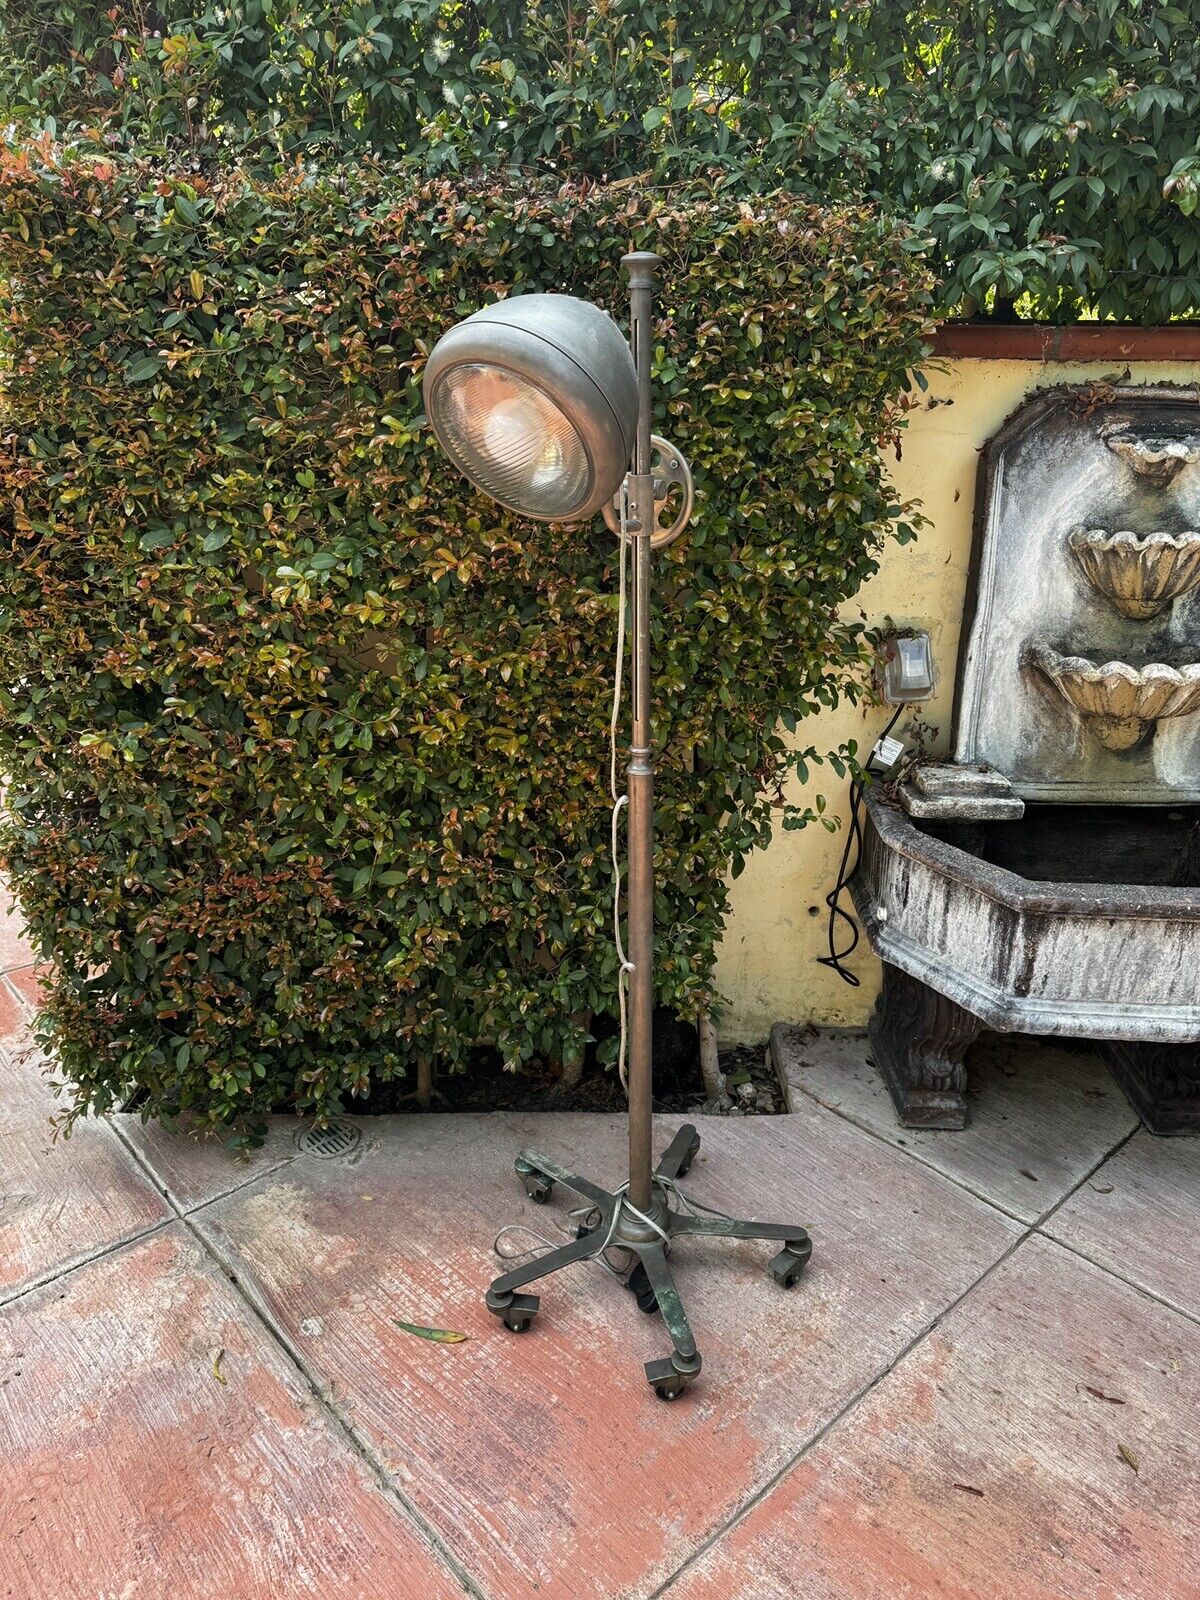 Crome and Vintage Headlight Floor Lamp with wheels